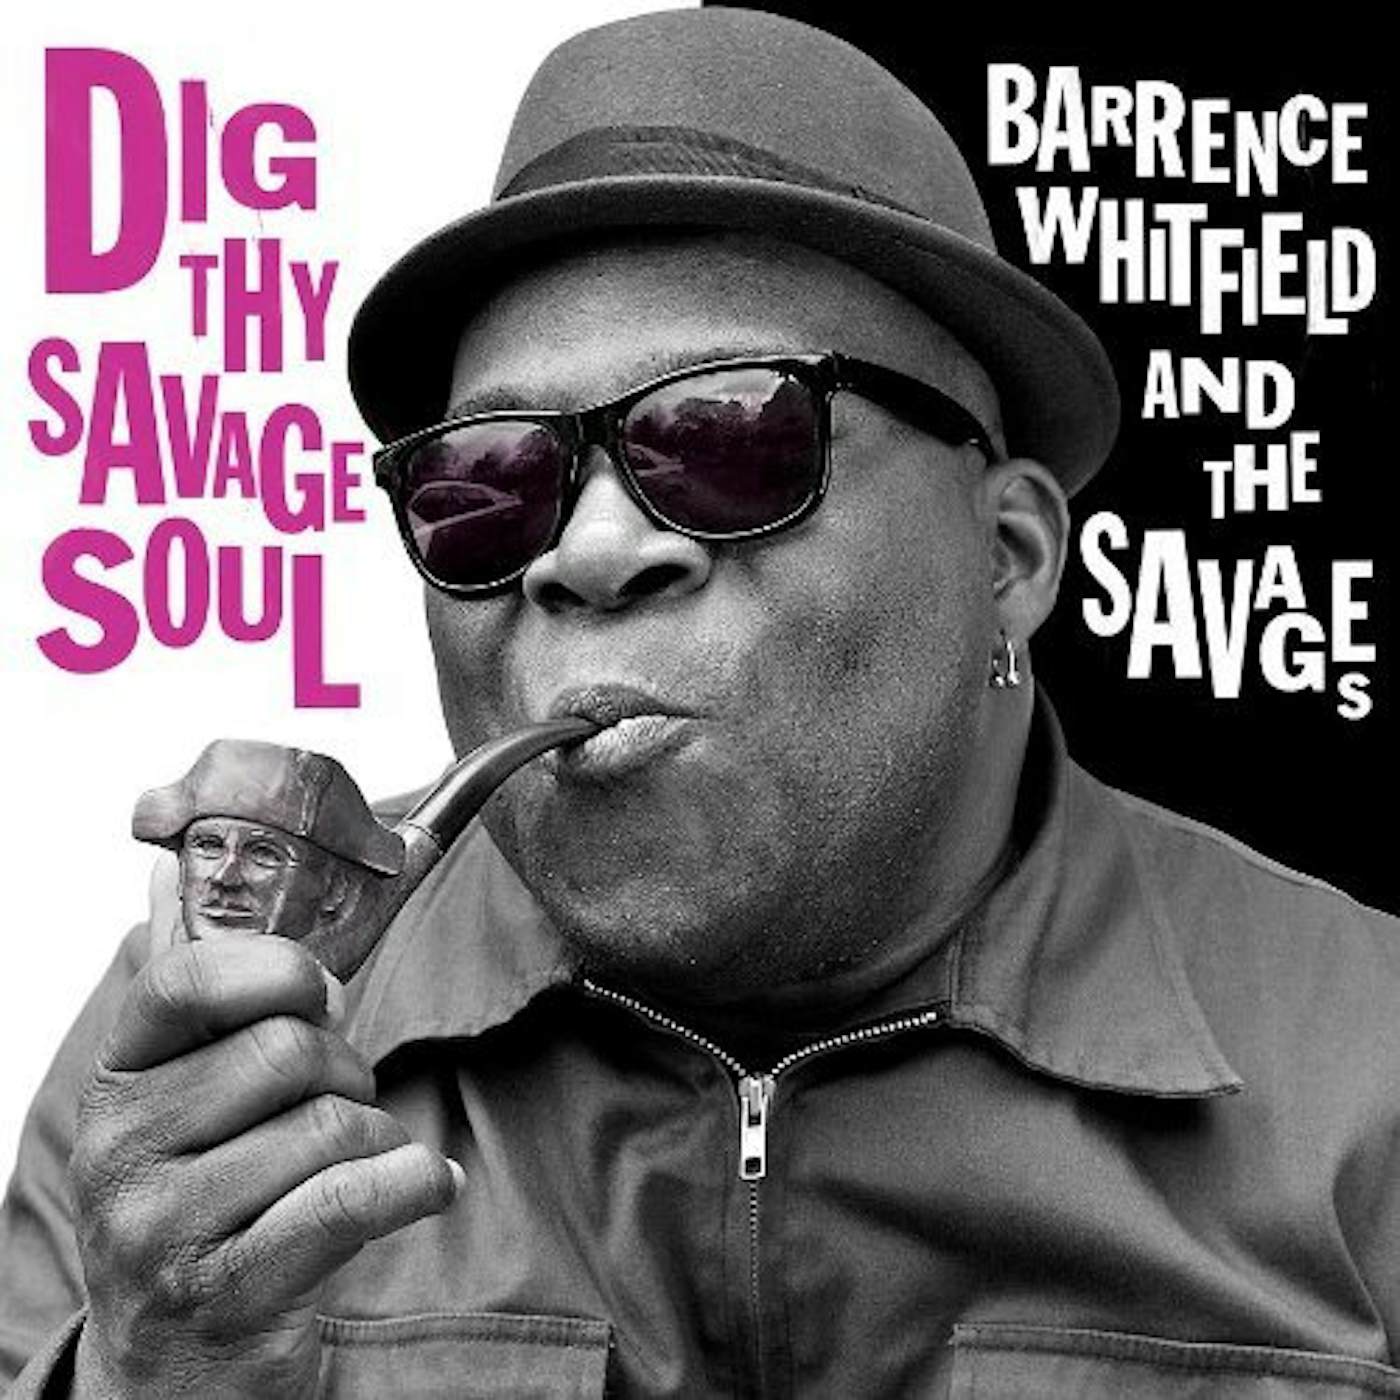 Barrence Whitfield & The Savages DIG THY SAVAGE SOUL CD